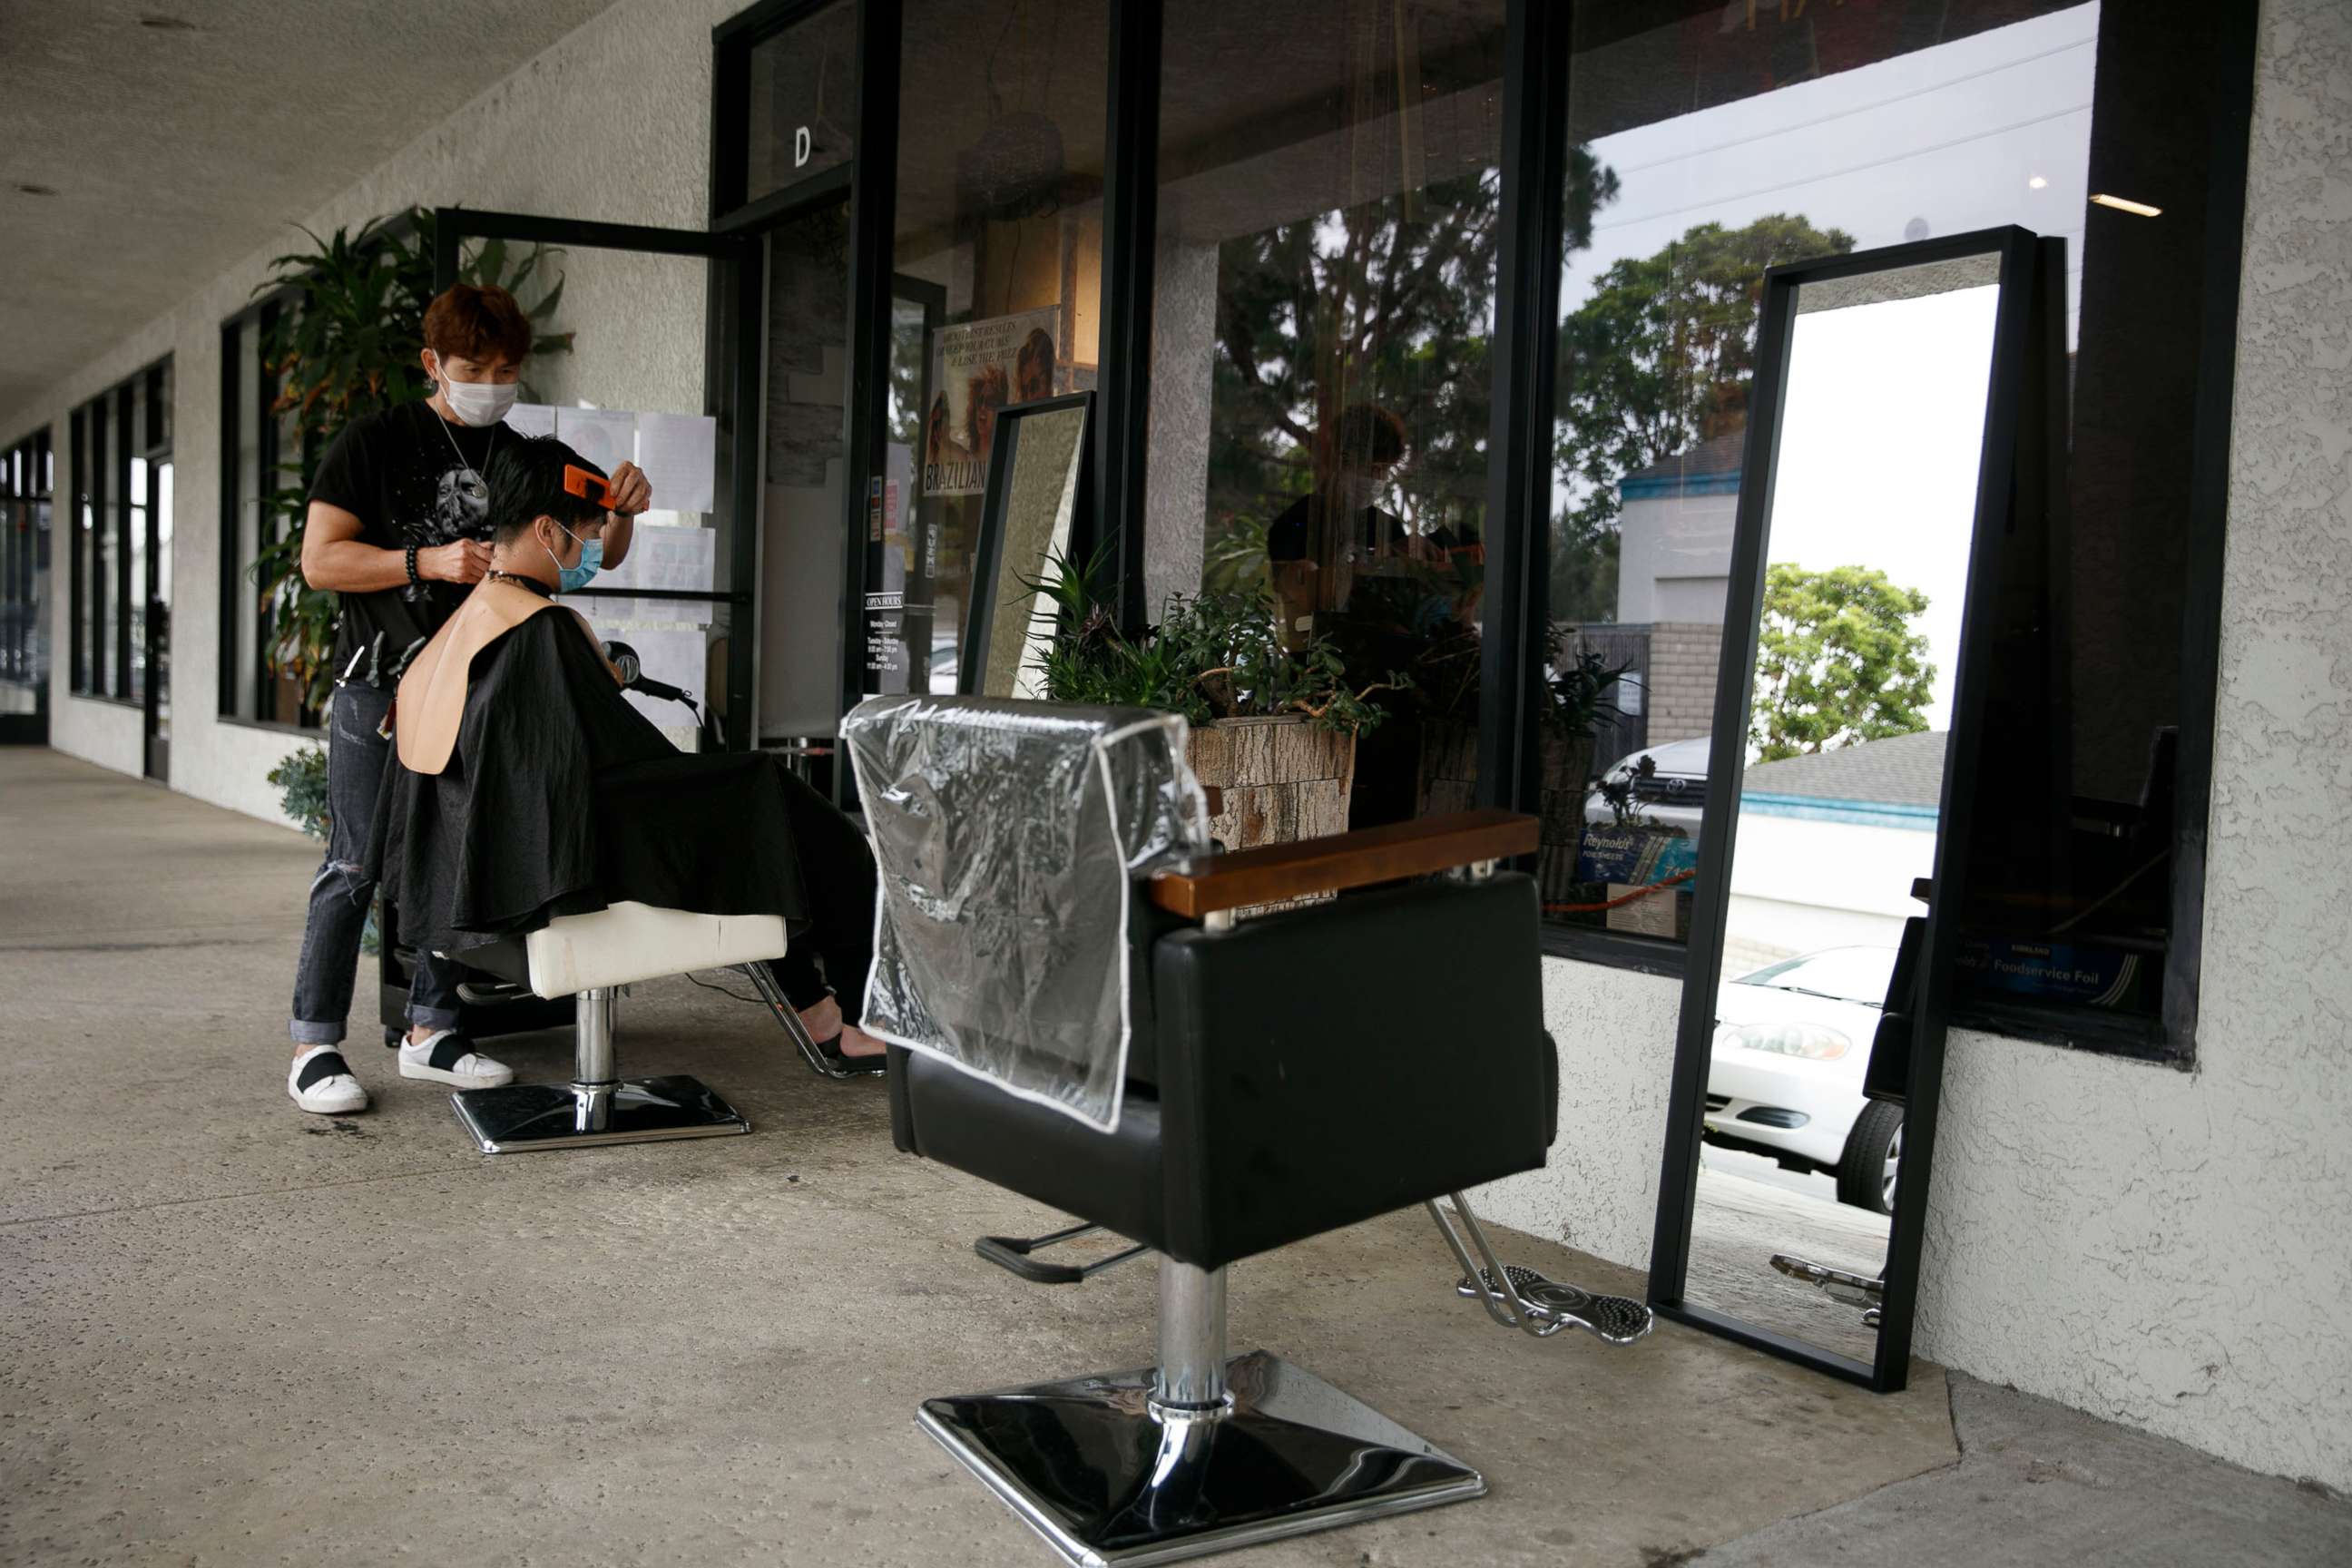 PHOTO: Hairstylist Travis Vu gives a haircut to Minh Dao at his outdoor hair salon in Fountain Valley, Calif., July 22, 2020.